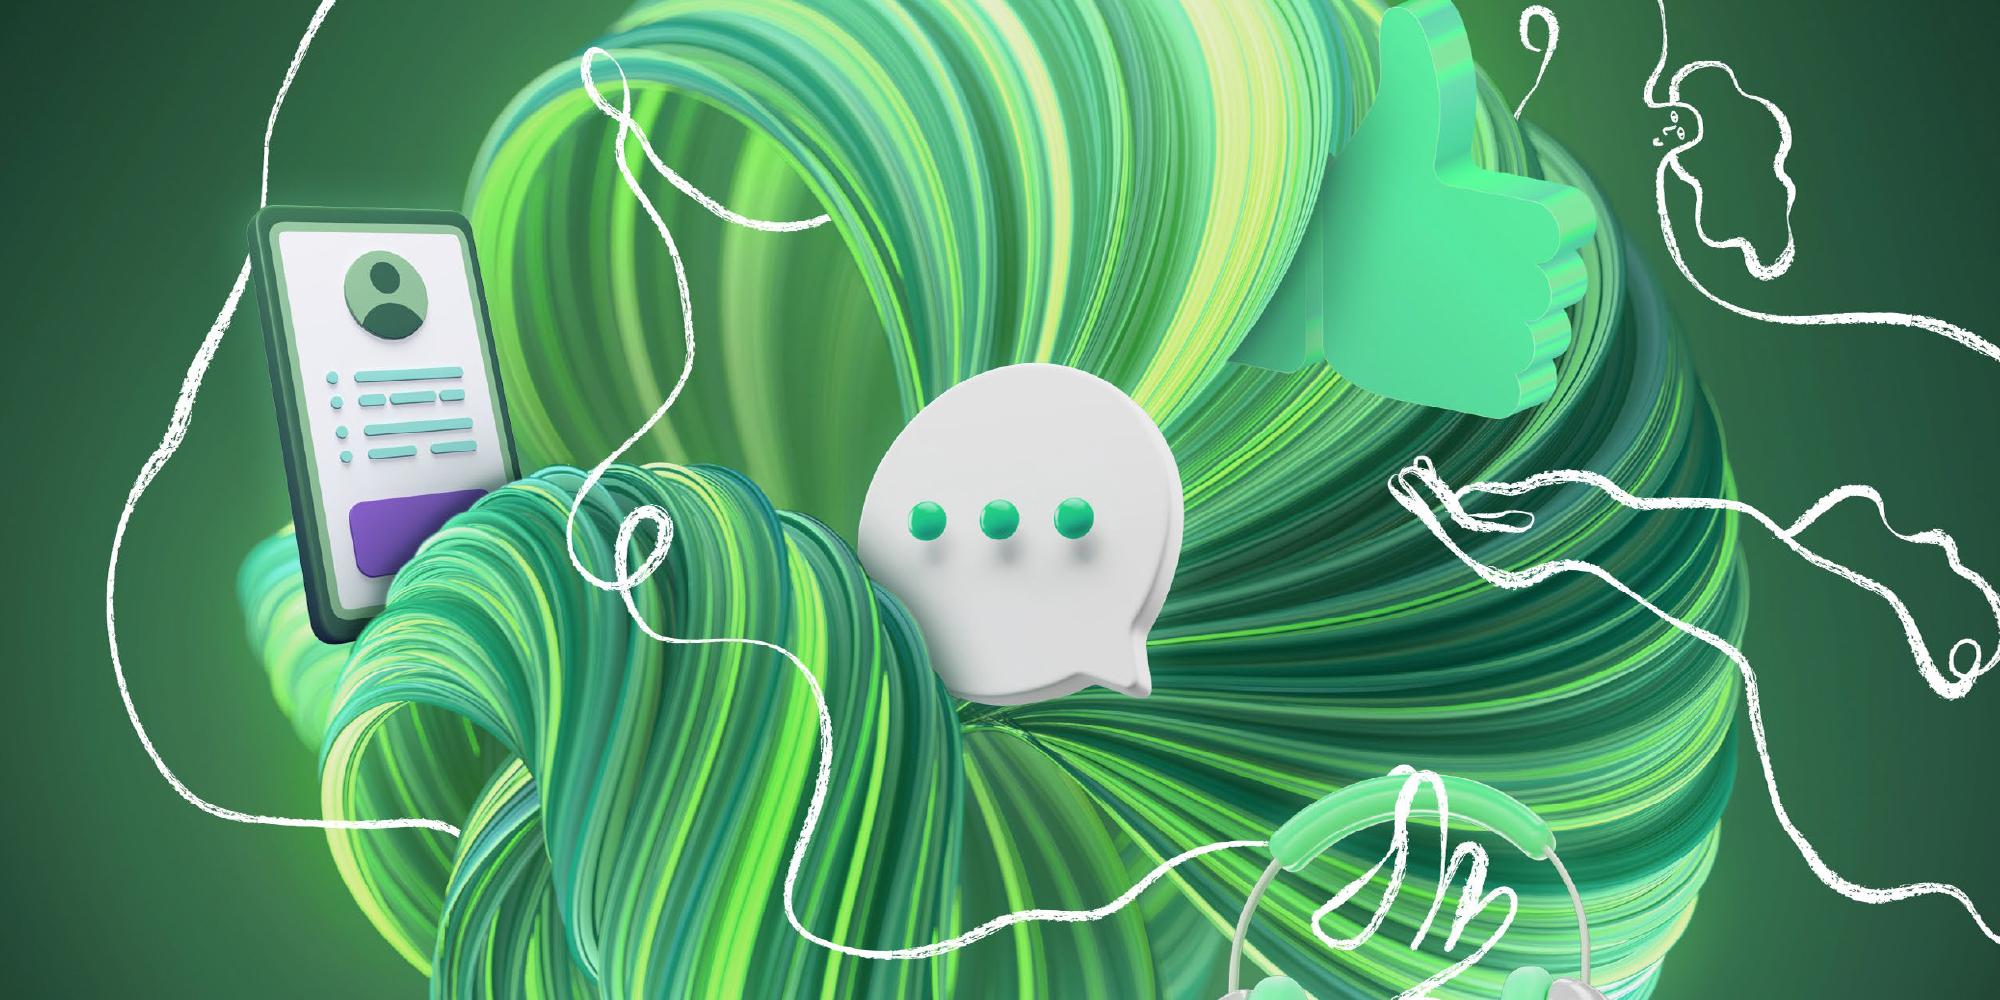 cellphone and text bubble in green, swirling circle